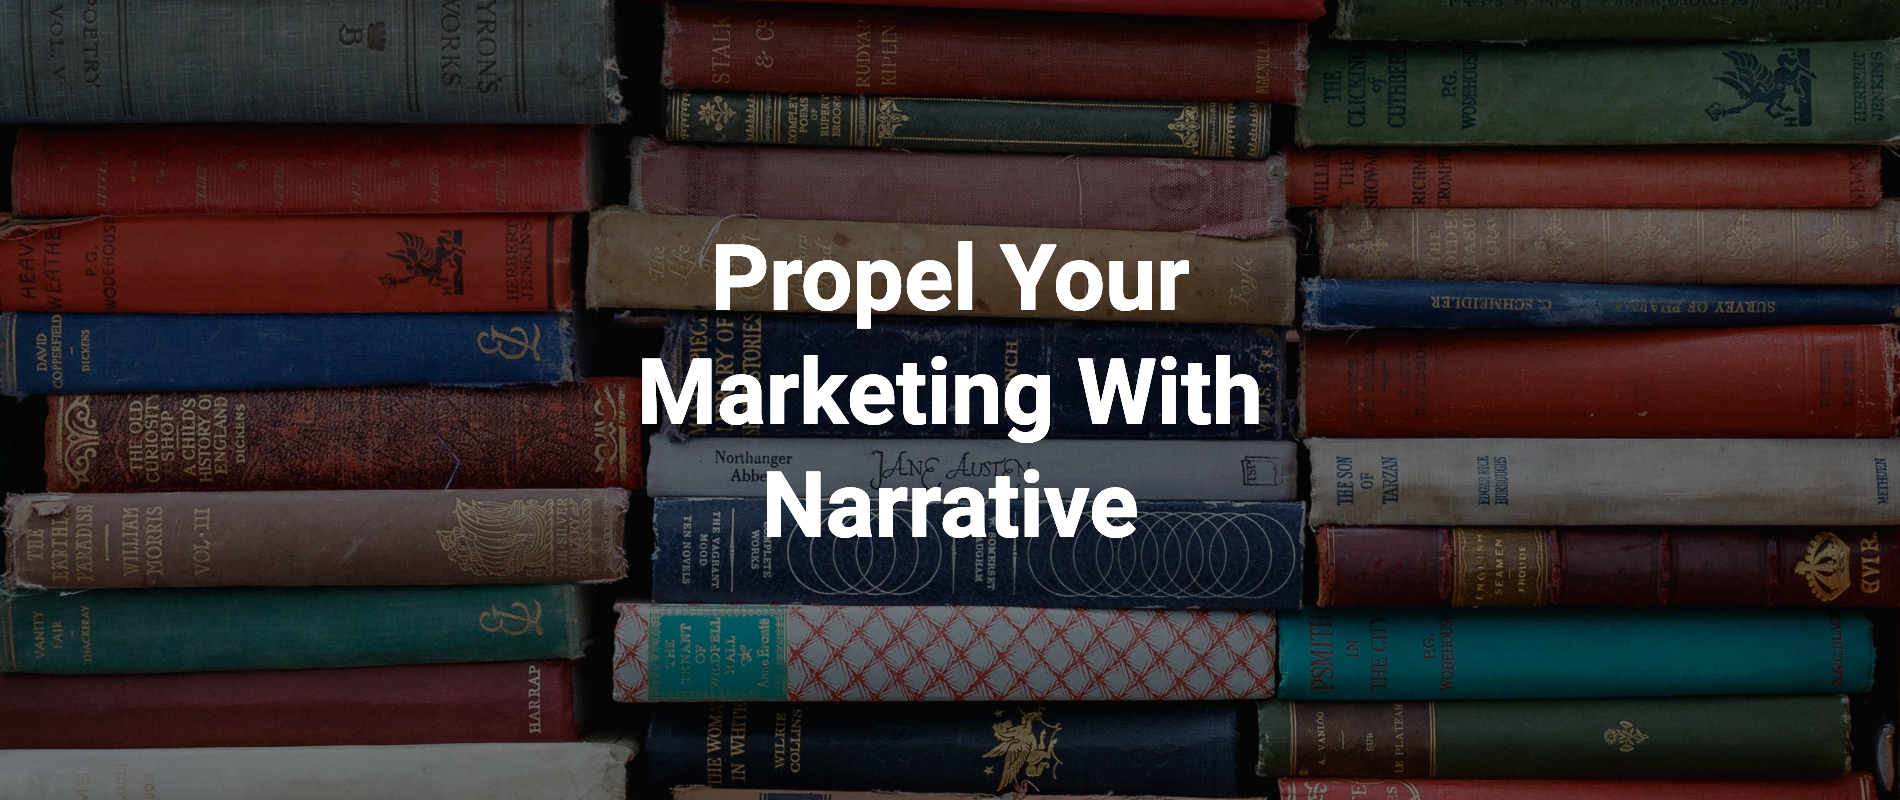 Propel Your Marketing With Narrative